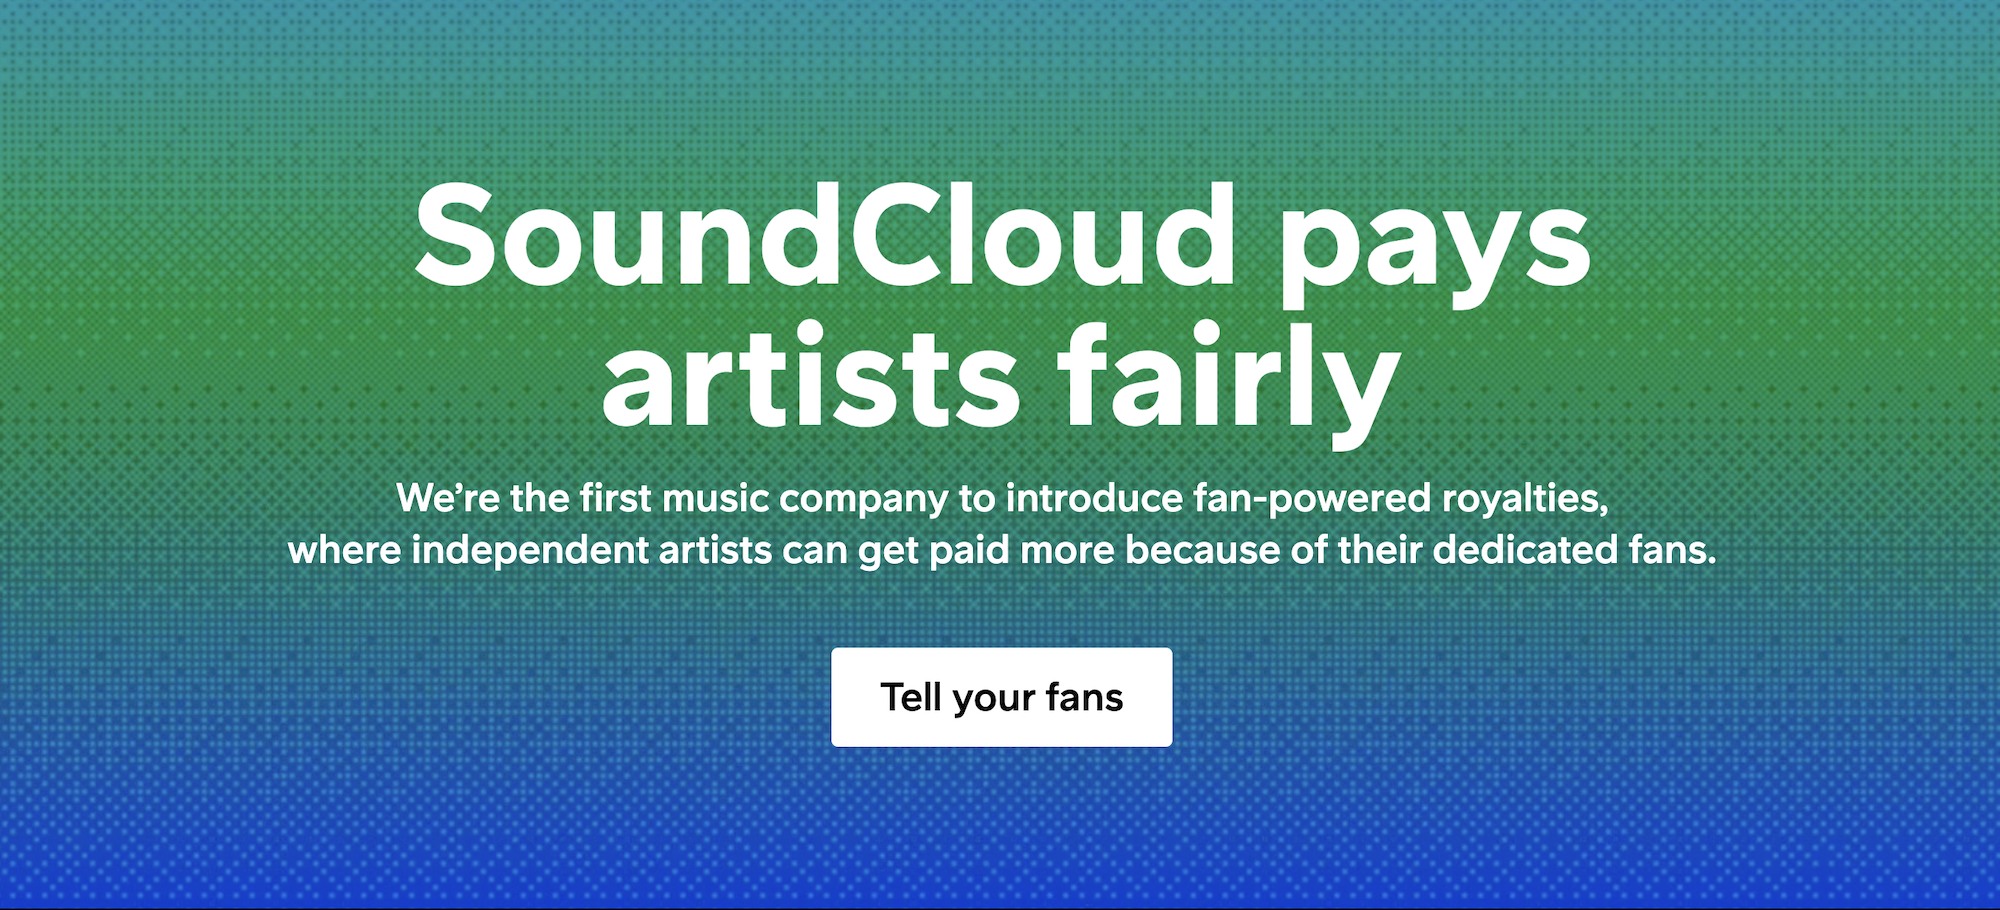 Historic first as SoundCloud challenge music streaming payment system with “fan-powered royalties”